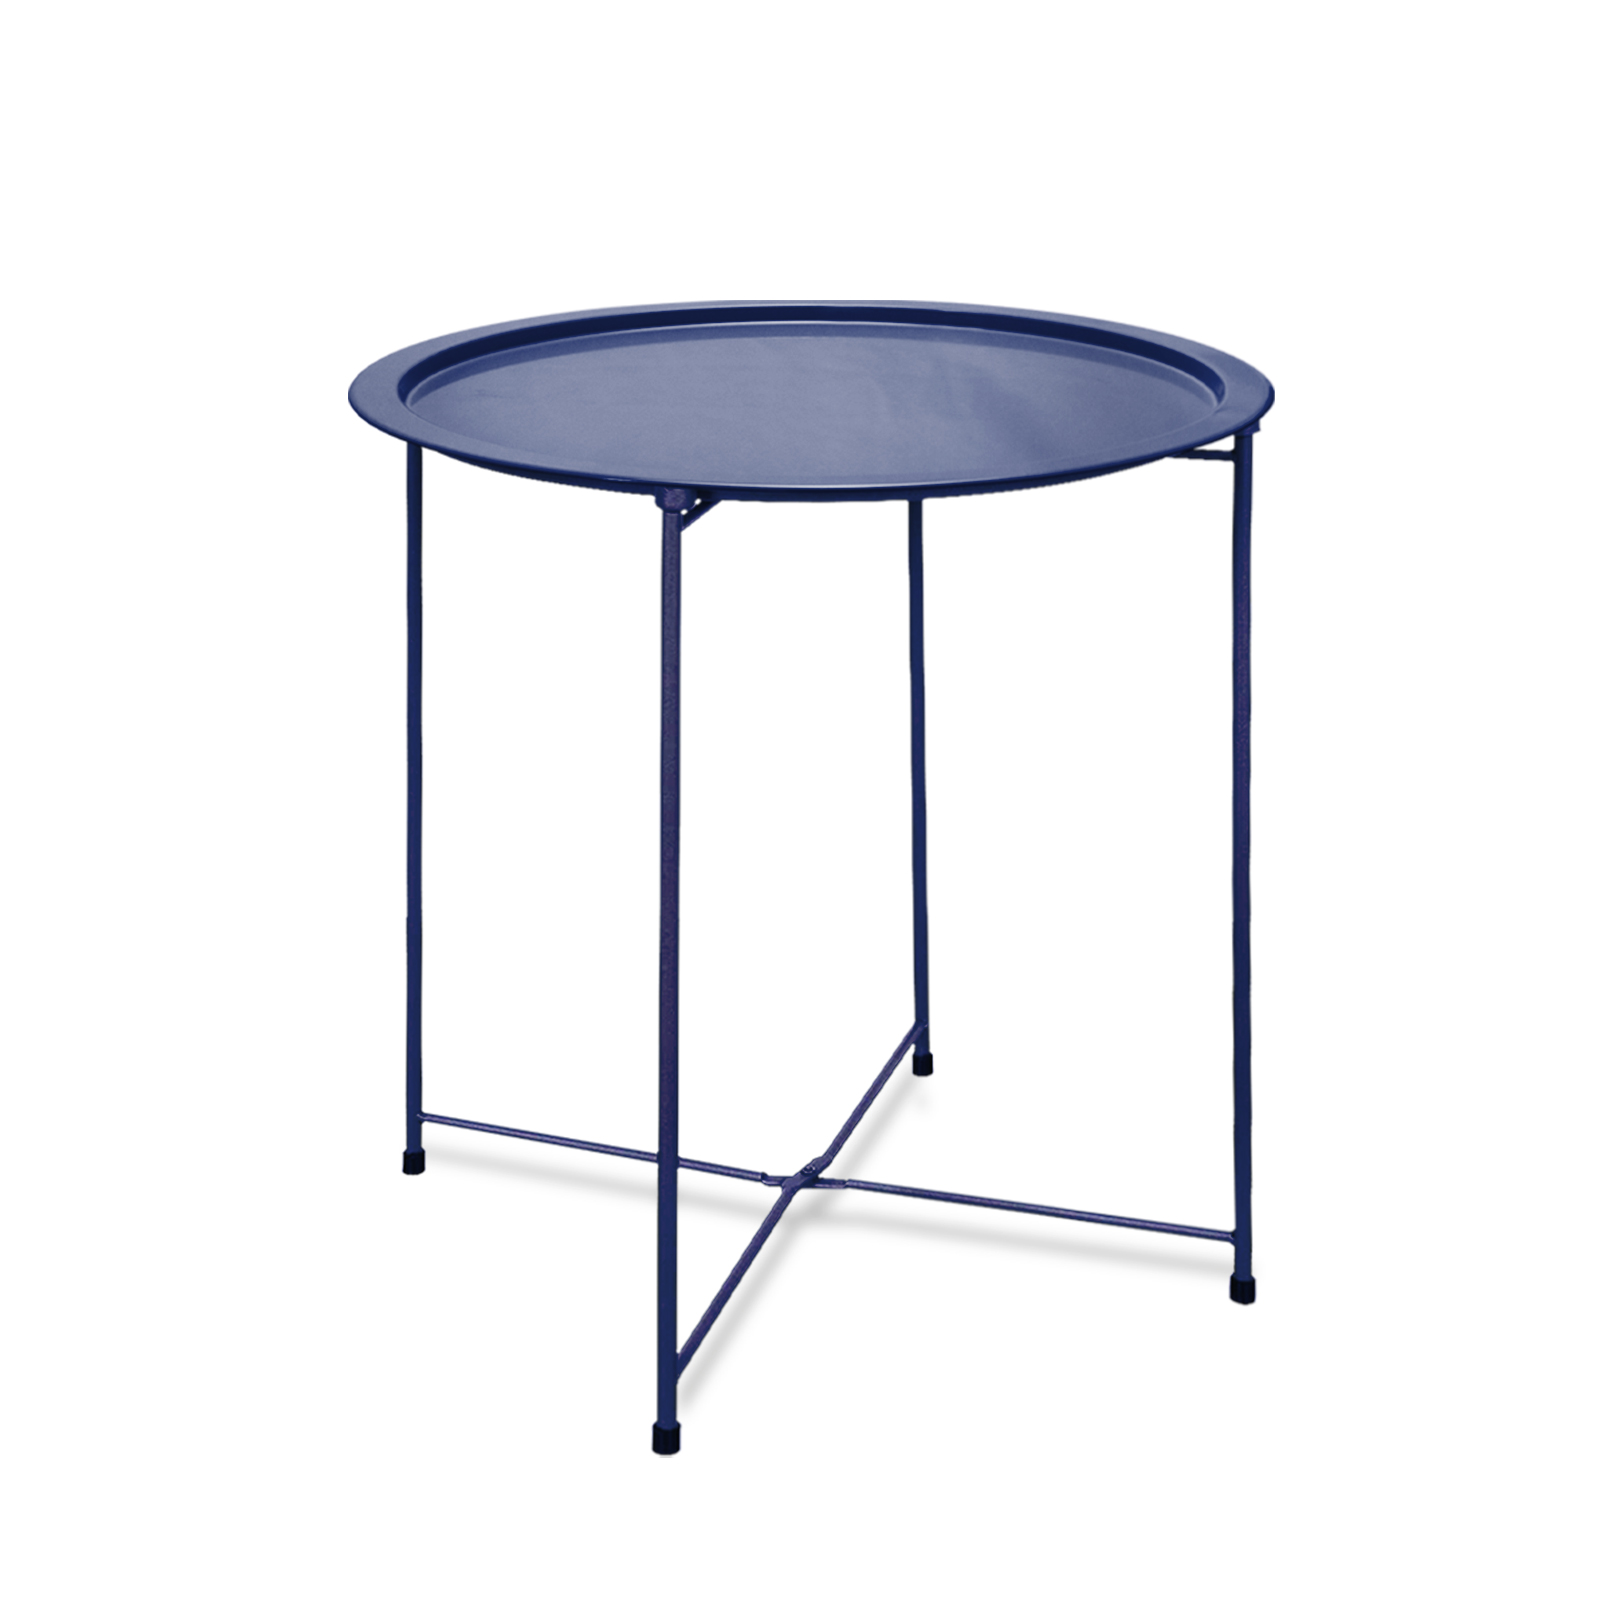 Folding Tray Metal Side Table Round End Table,Dark Blue Sofa Small Accent Fold-able Table, Round End Table Tray, Next to Sofa Table, Snack Table for Living Room and Bed Room - image 1 of 6